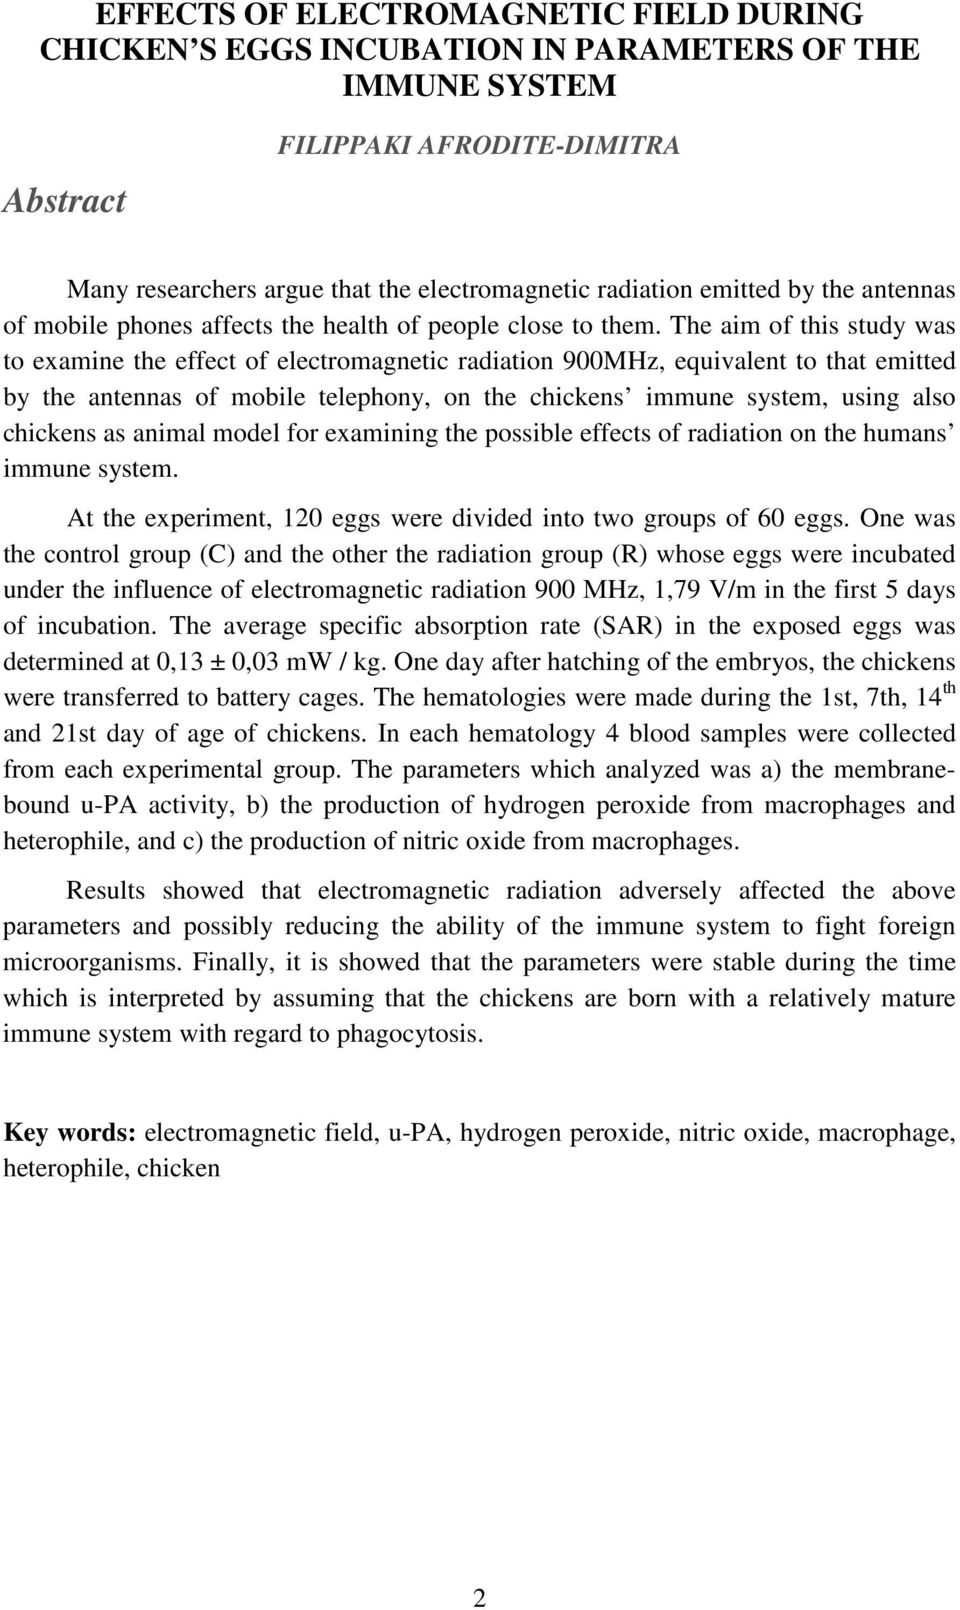 The aim of this study was to examine the effect of electromagnetic radiation 900MHz, equivalent to that emitted by the antennas of mobile telephony, on the chickens immune system, using also chickens